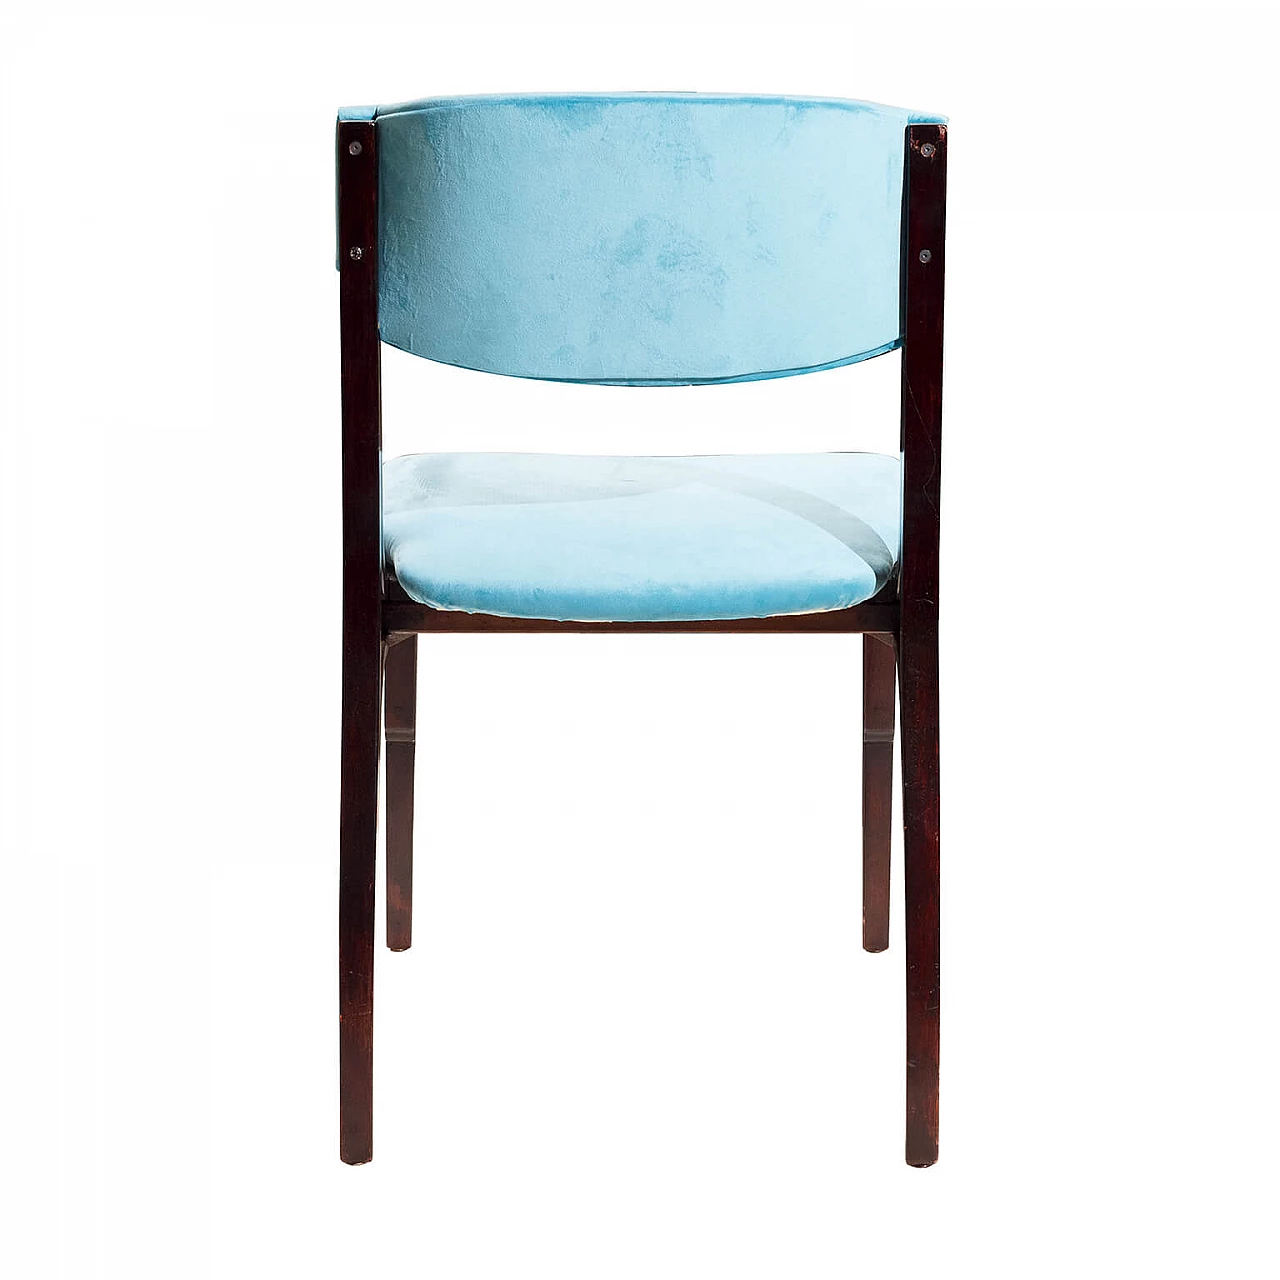 5 Blue velvet chairs by Gianfranco Frattini for Cantieri Carugati, 1960s 1116525